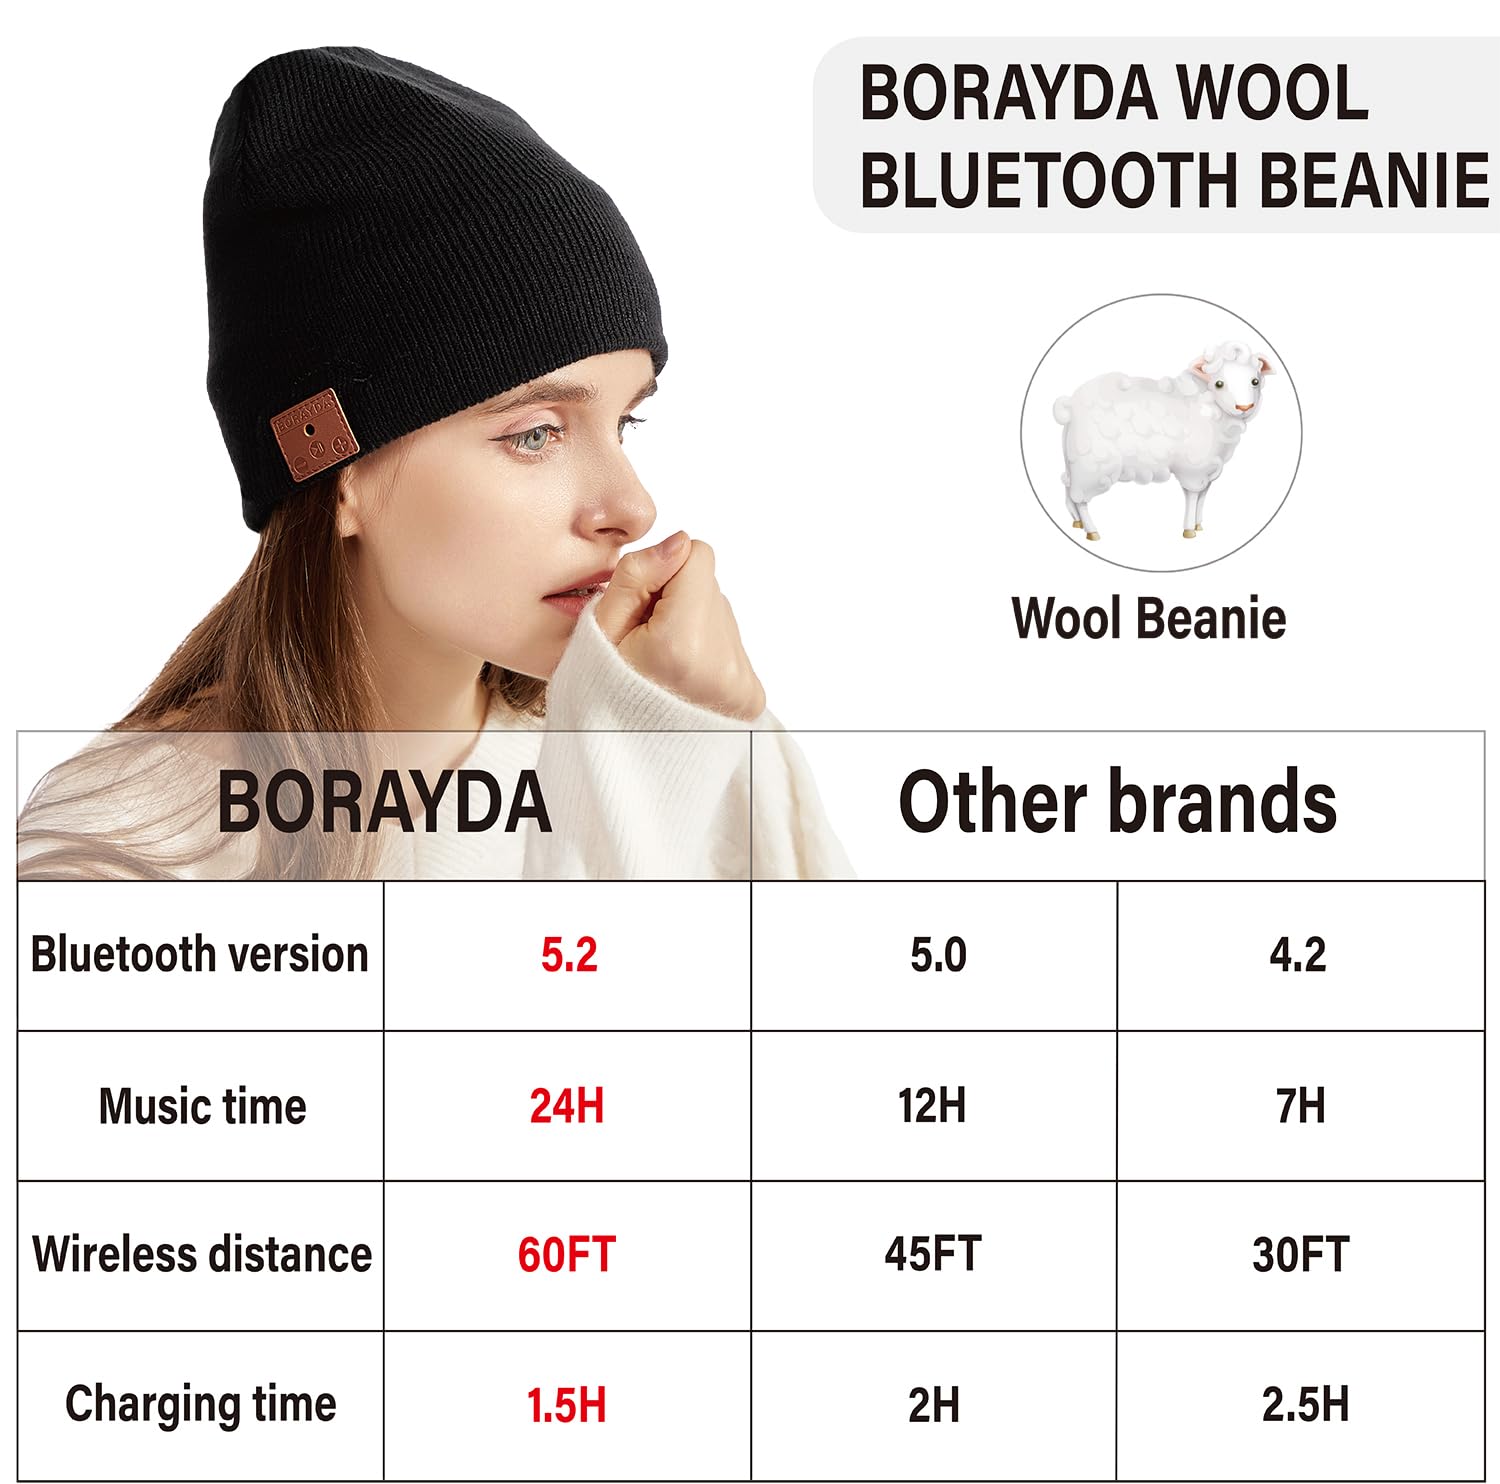 BORAYDA Bluetooth Beanie, Bluetooth 5.2 Wool Hat HD Stereo,24 Hours Play Time,Built-in Microphone, Men's/Women's Christmas Electronic Gift (Black)